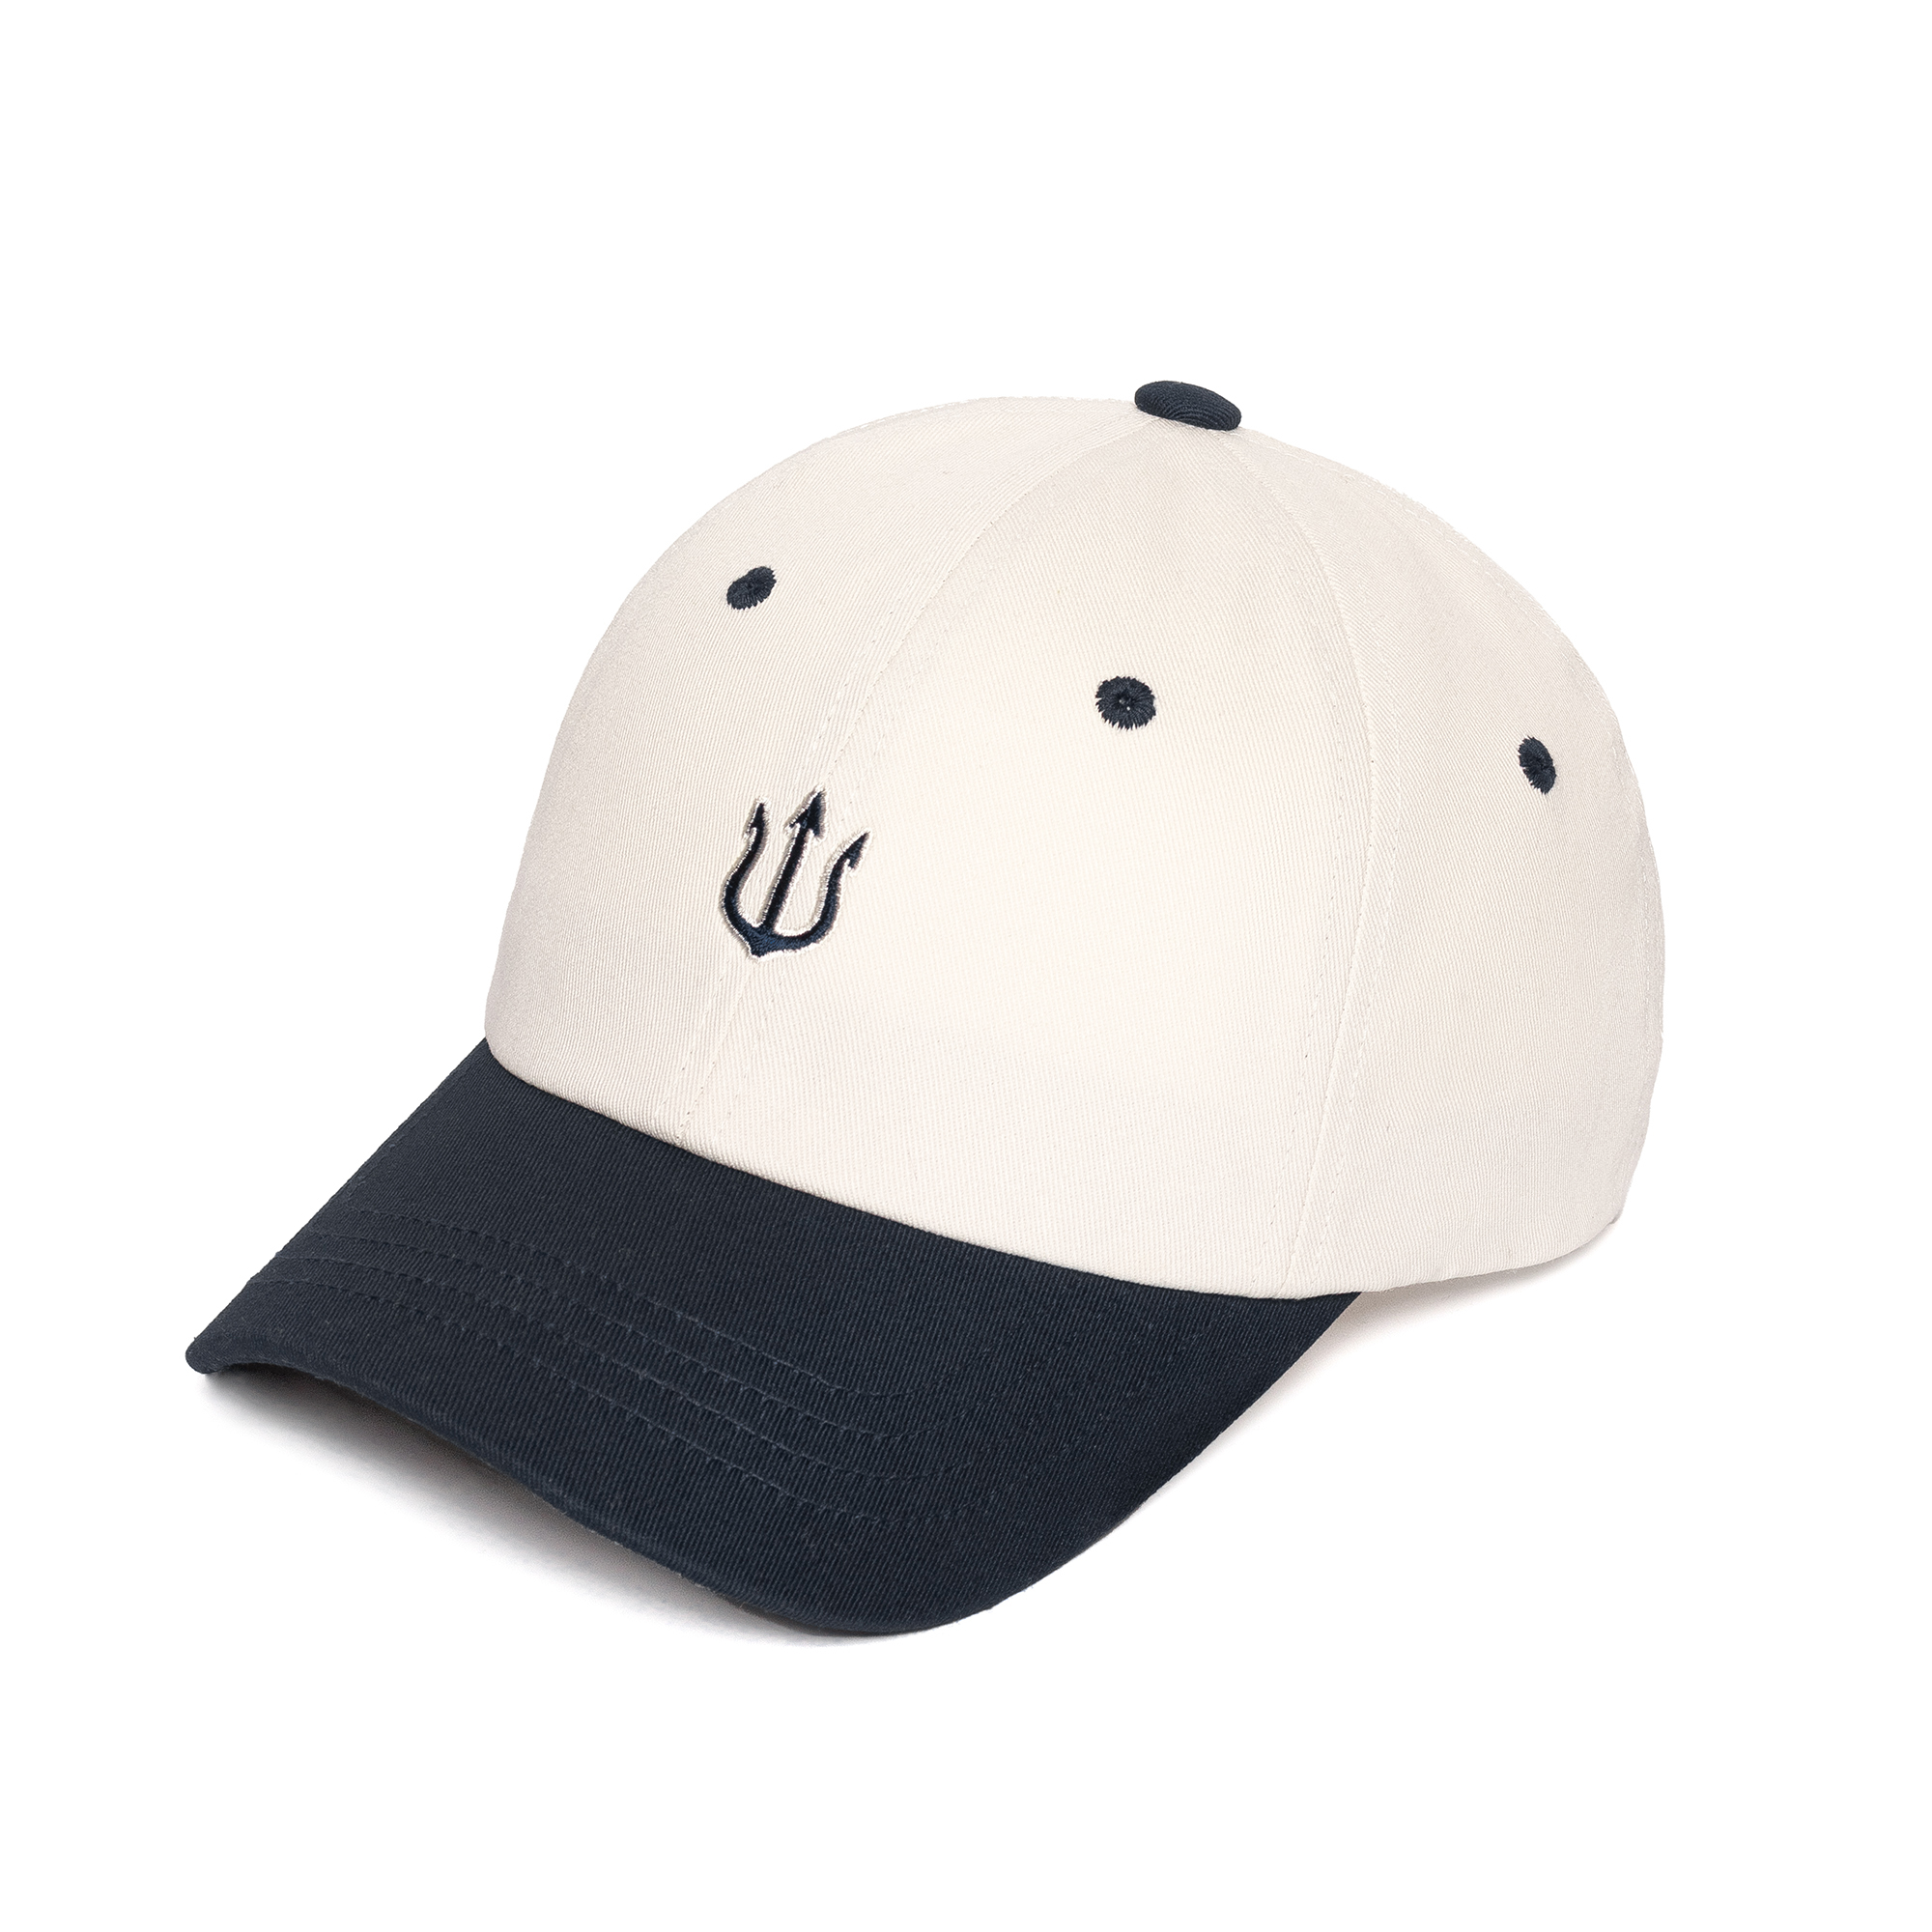 HW-BC183 : Two Tone Trident CapㅣIVORY+NAVY